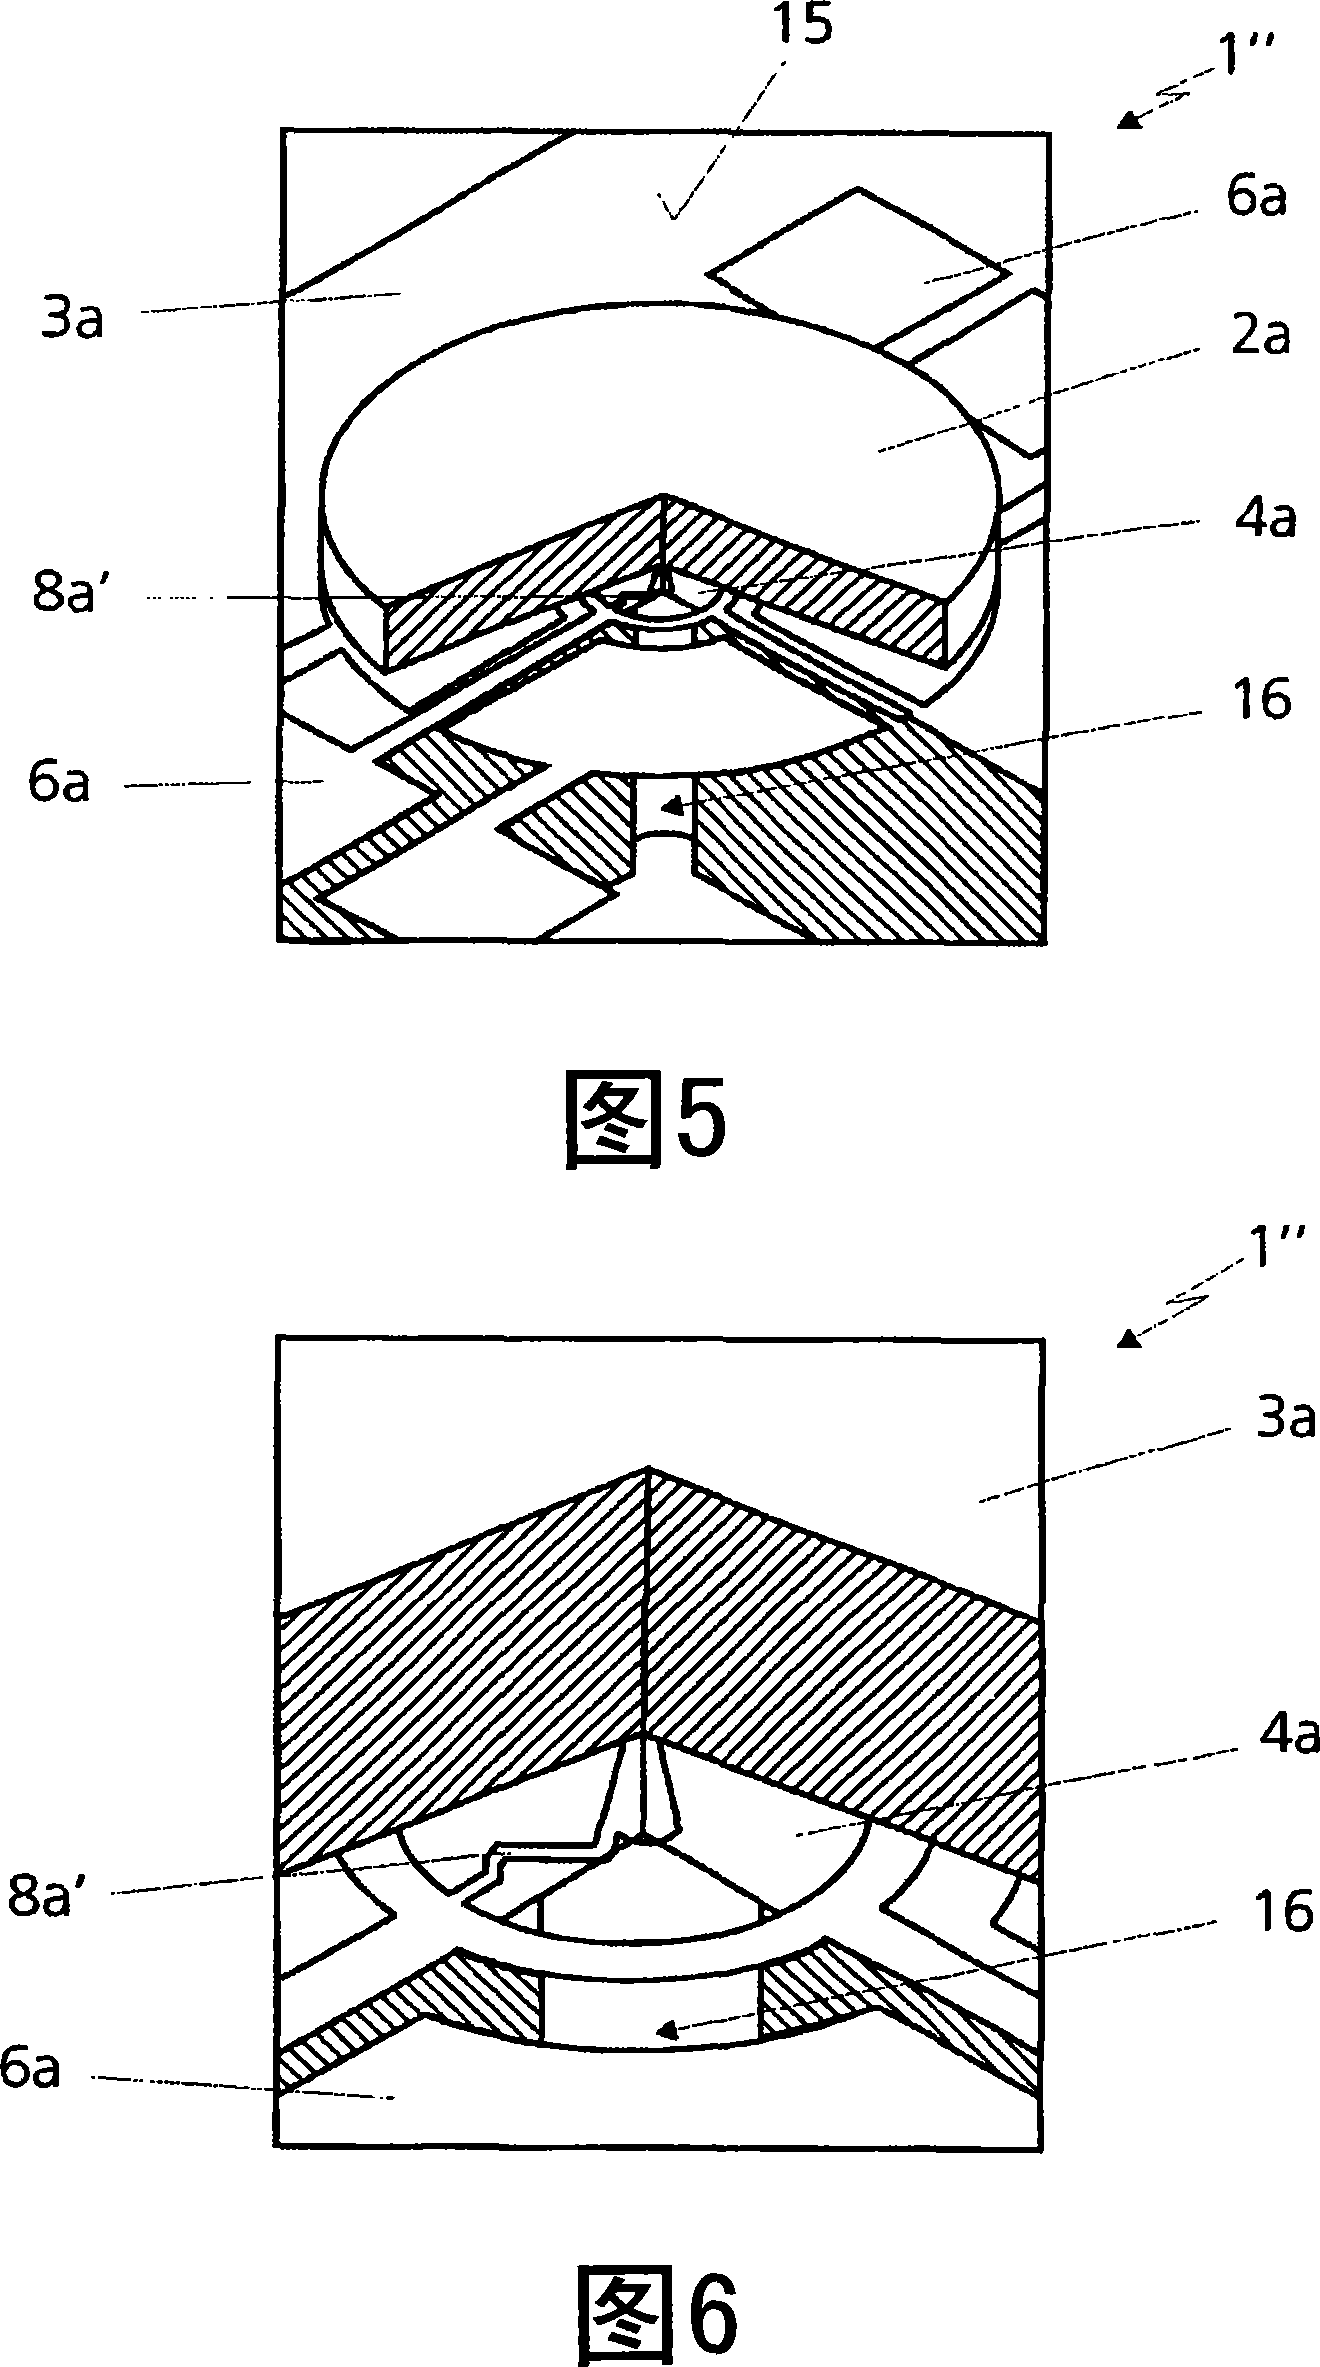 Micro electromechanical device for tilting a body in two degrees of freedom